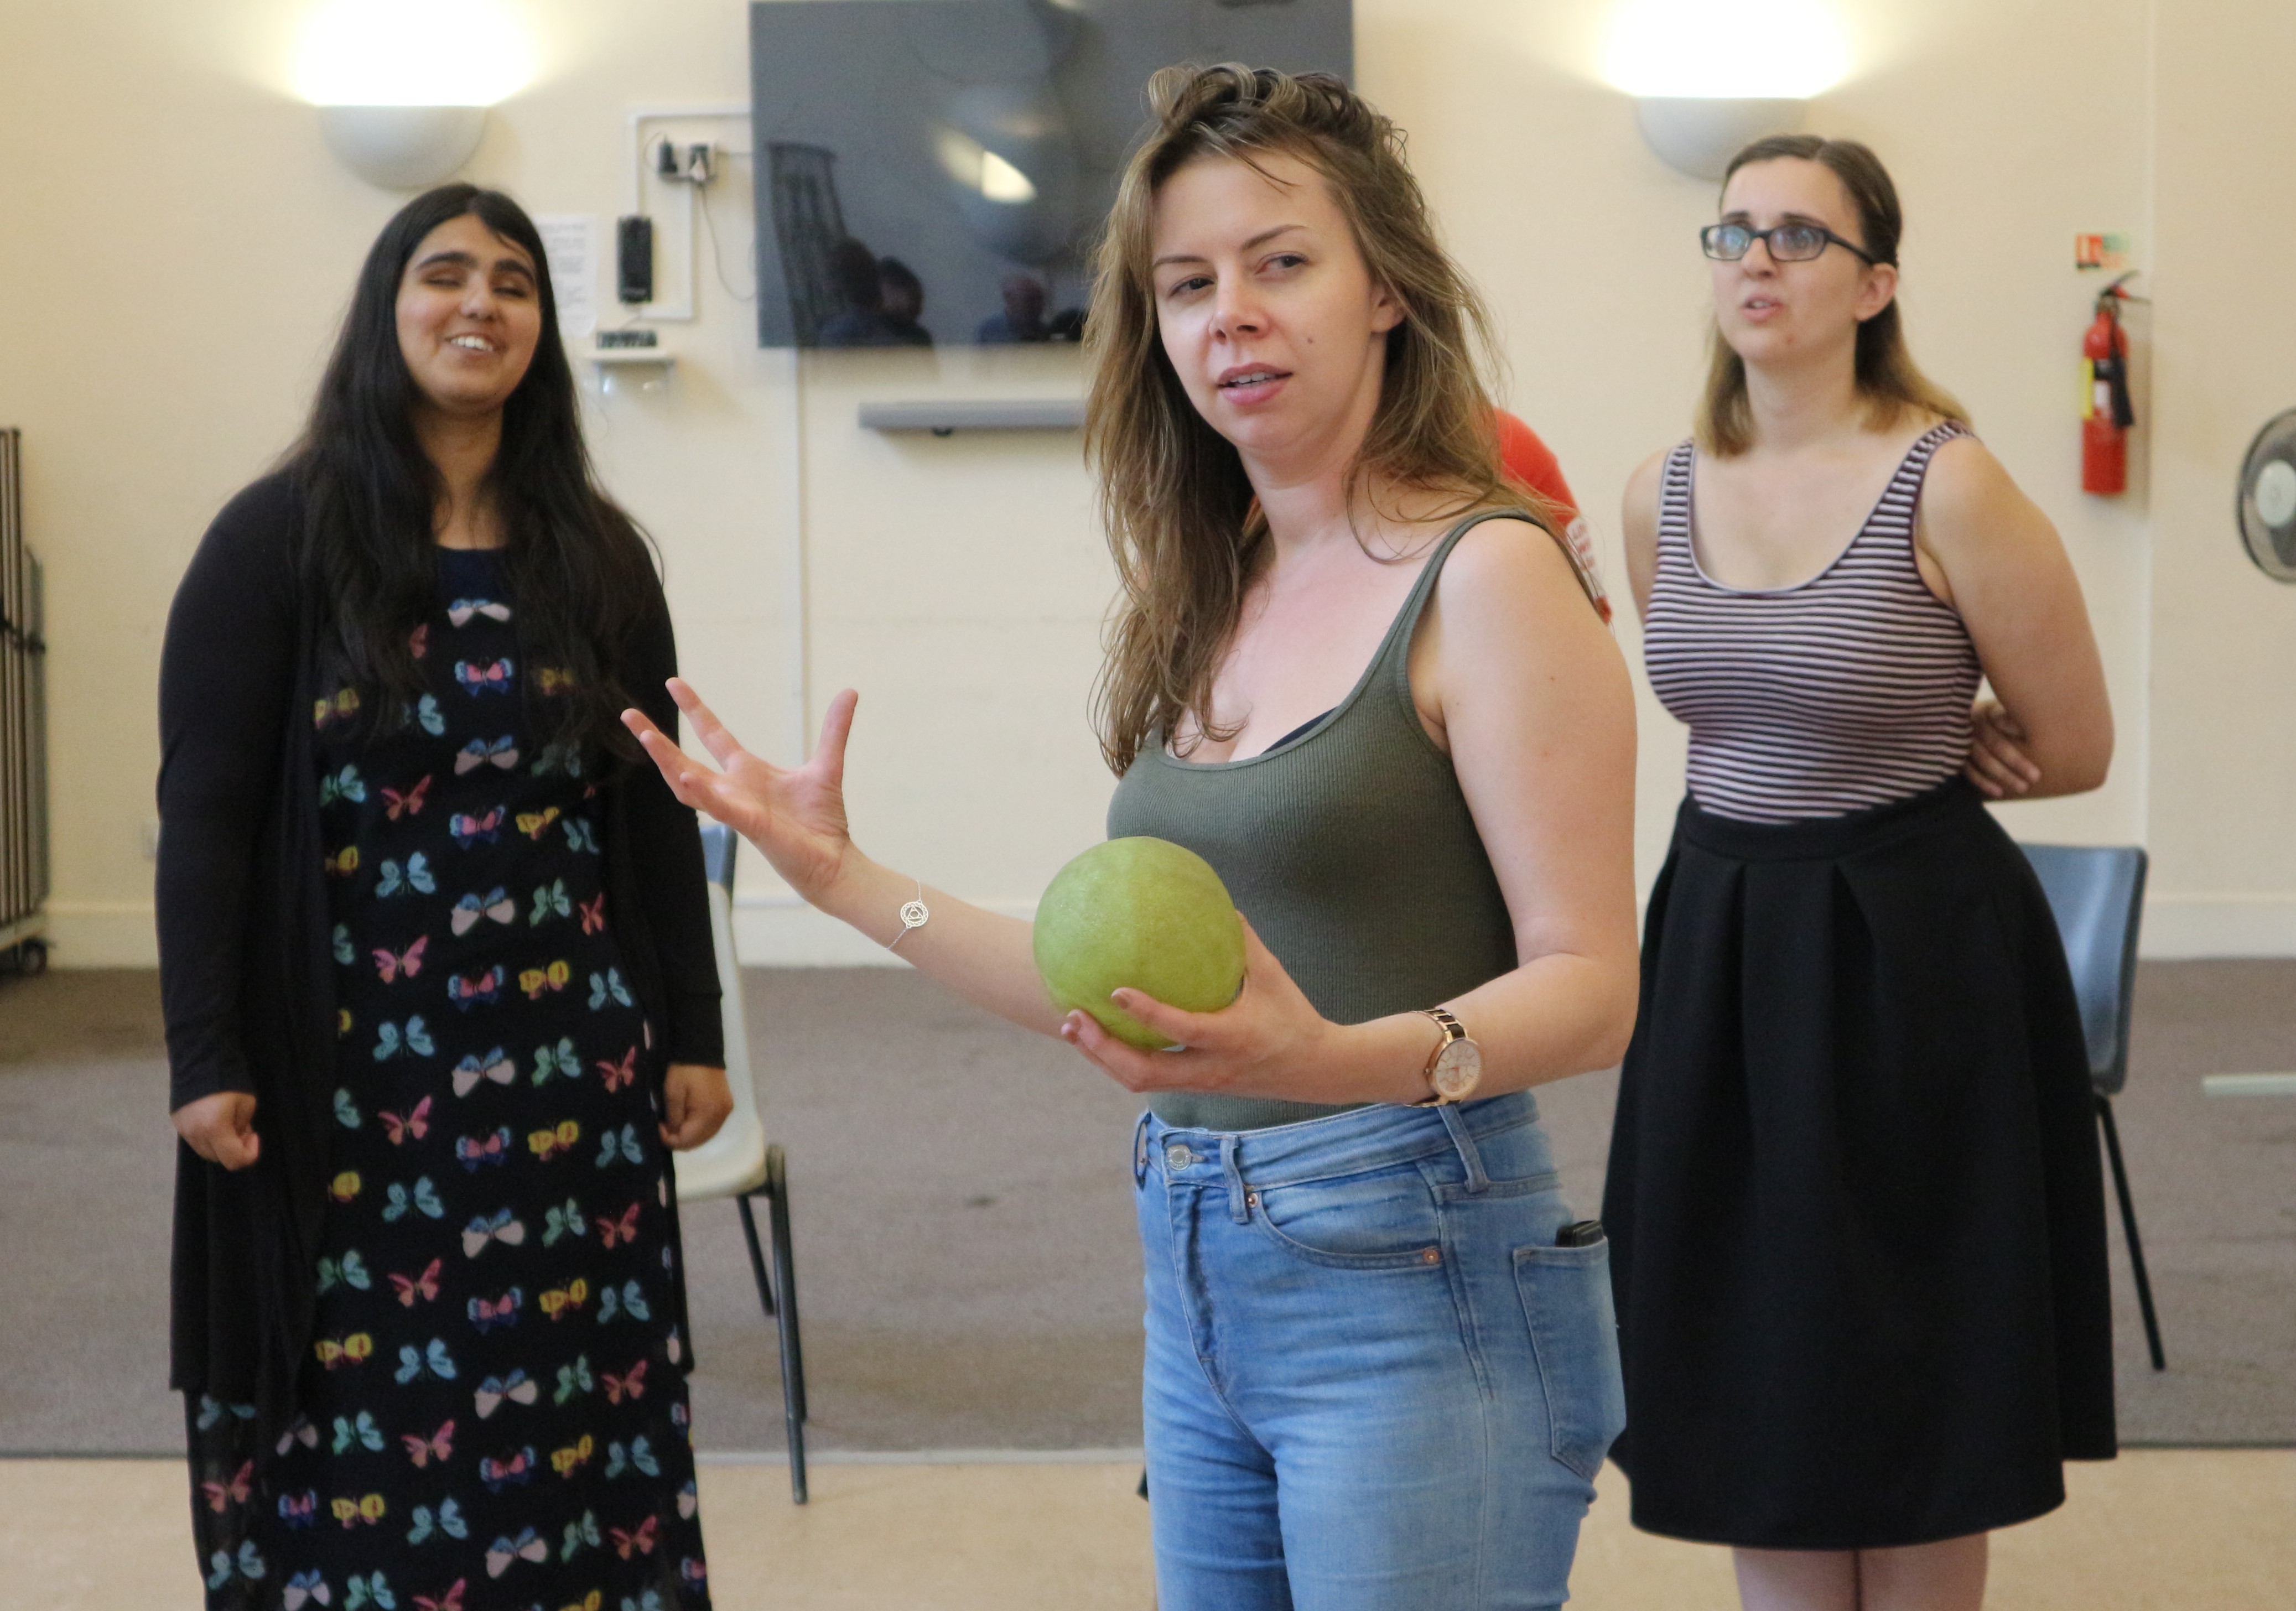 A white woman stands in front of two workshop participants. The woman has a light green ball in her hand, looking thoughtfully across the room while gesticulating